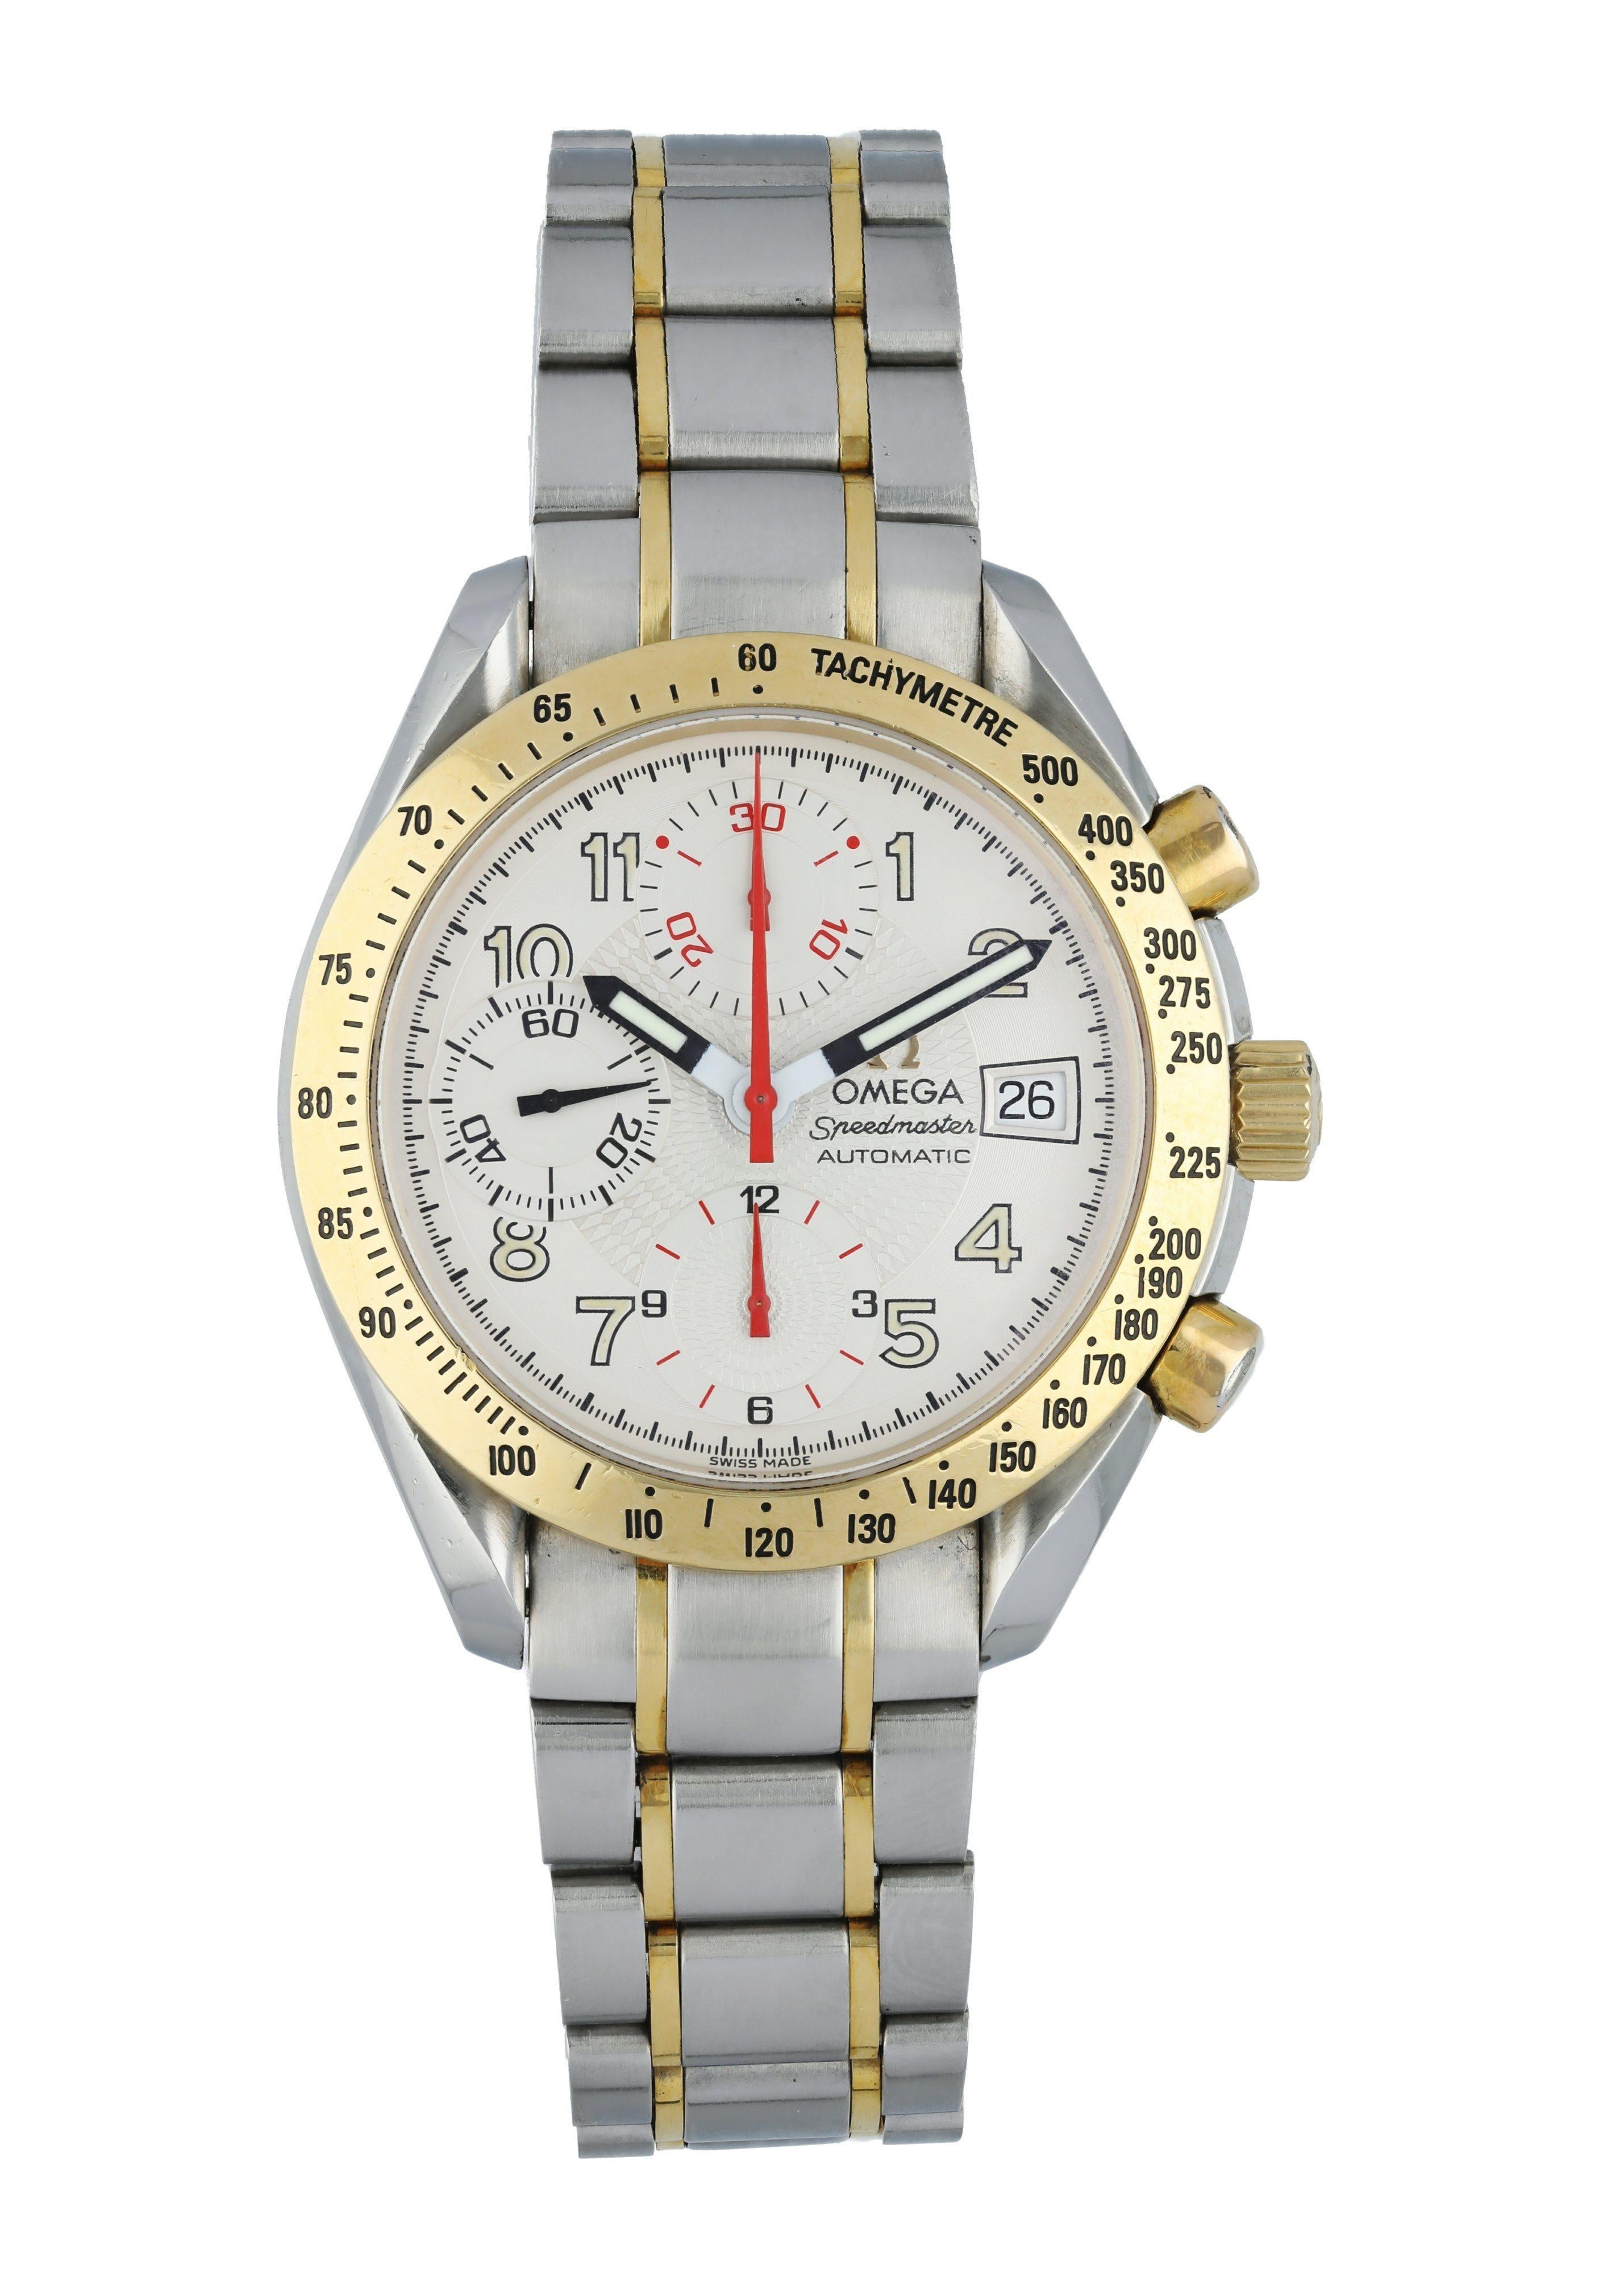 Omega Speedmaster 3313.33.00 Men Watch. 
39mm Stainless Steel case. 
Yellow Gold Tachymeter bezel. 
Gray dial with Luminous Steel hands and Arabic numeral hour markers. 
Minute markers on the outer dial. 
Date display at the 3 o'clock position.